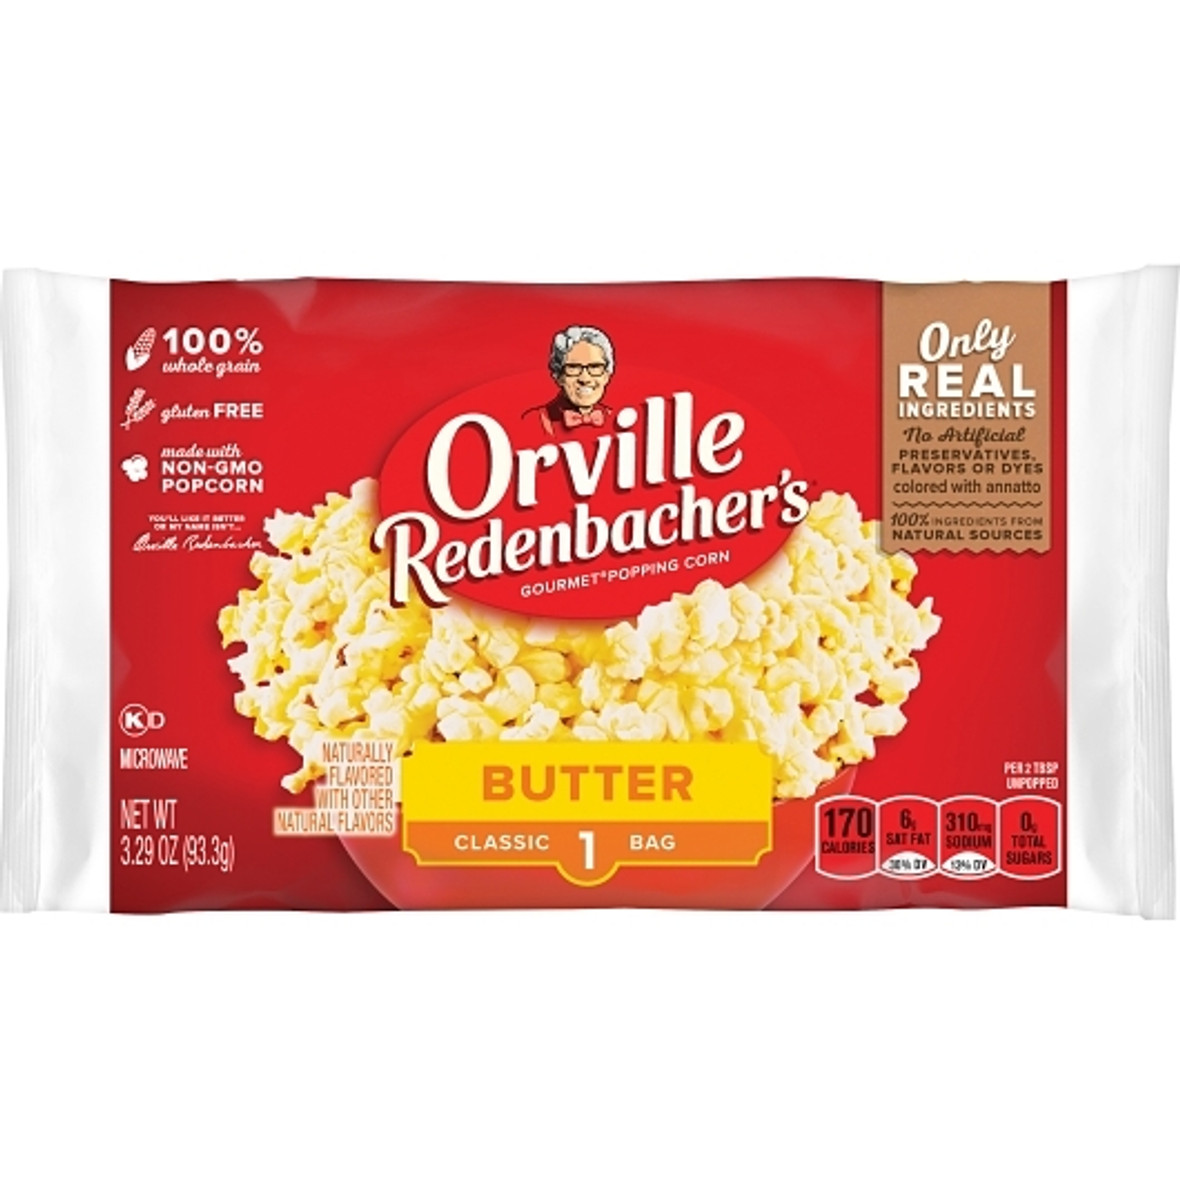 Orville Redenbachers Snack Size Butter Flavored Popcorn, 3.3 Ounce, 36 Per Case